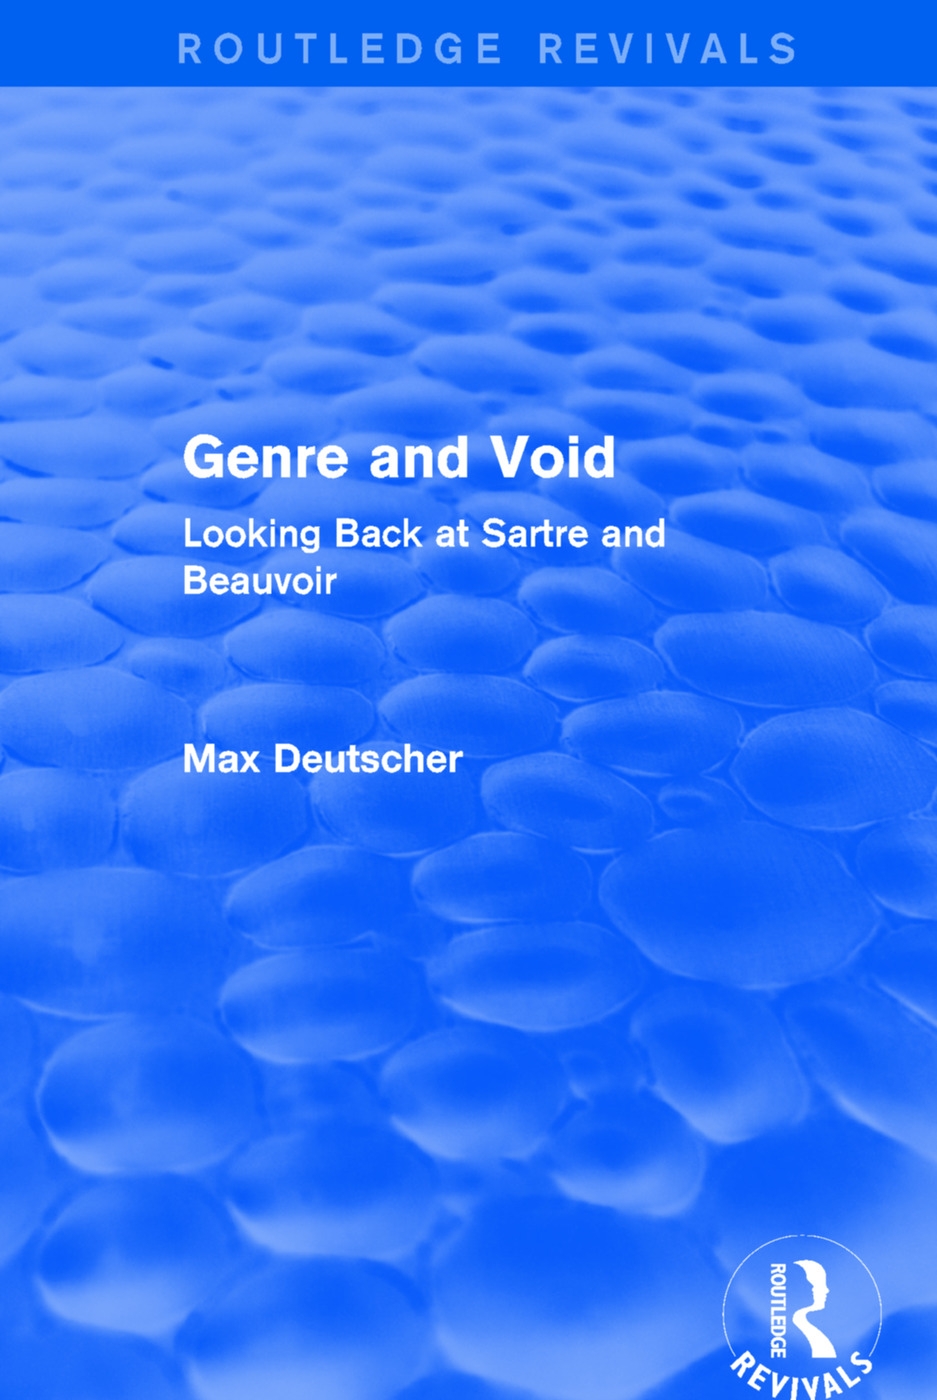 Revival: Genre and Void (2003): Looking Back at Sartre and Beauvoir